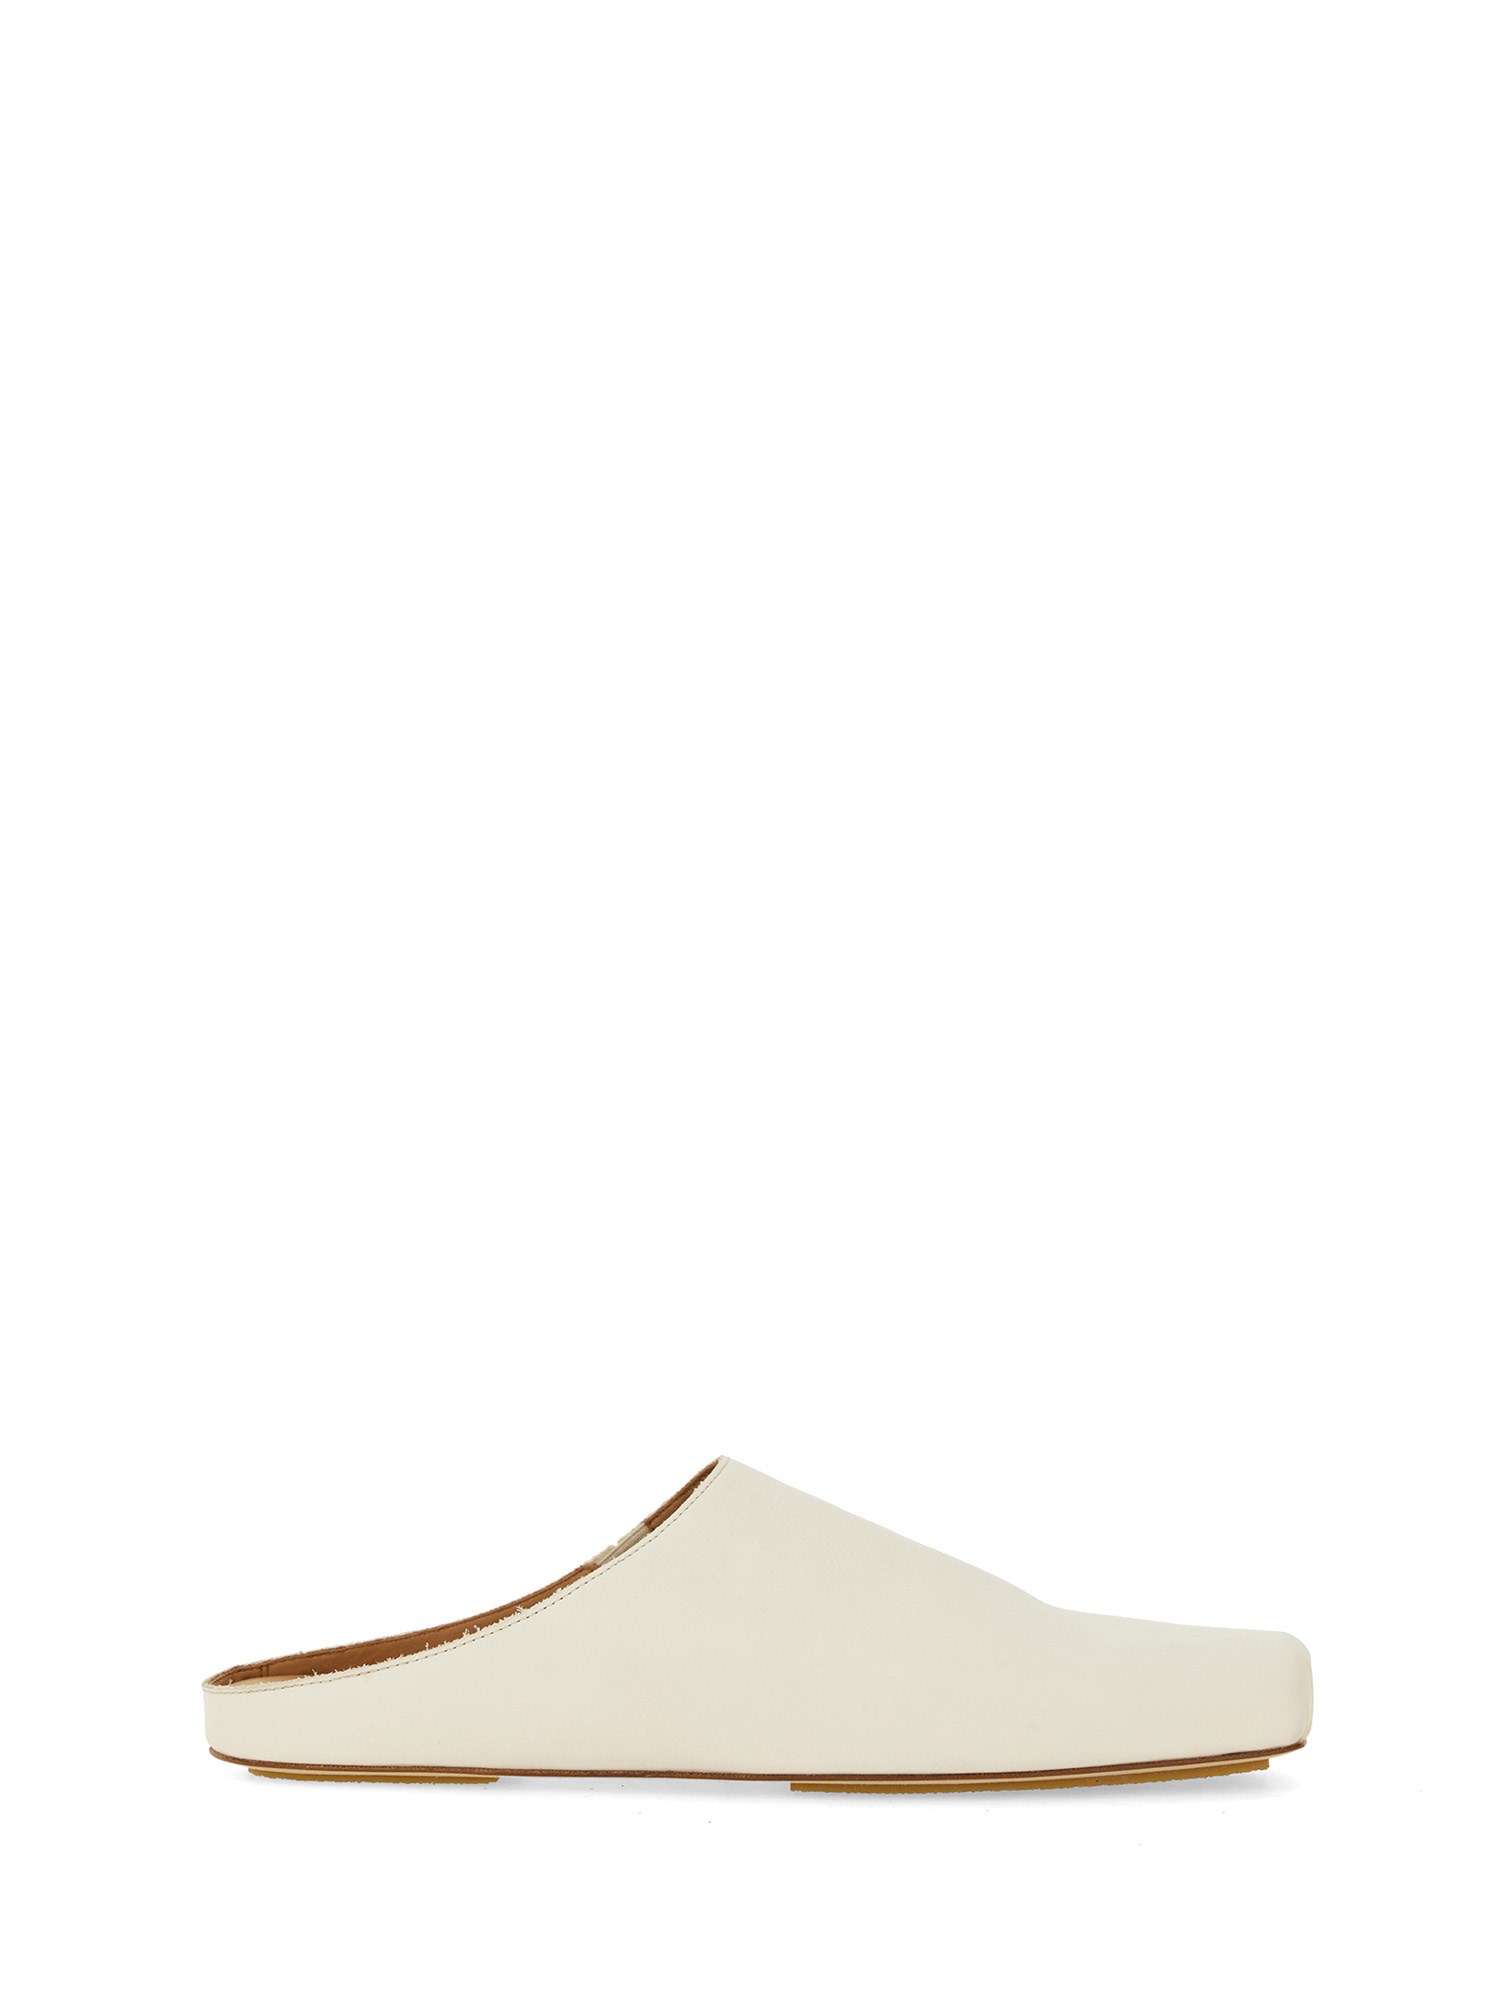 Uma Wang Sandal With Square Toe In White